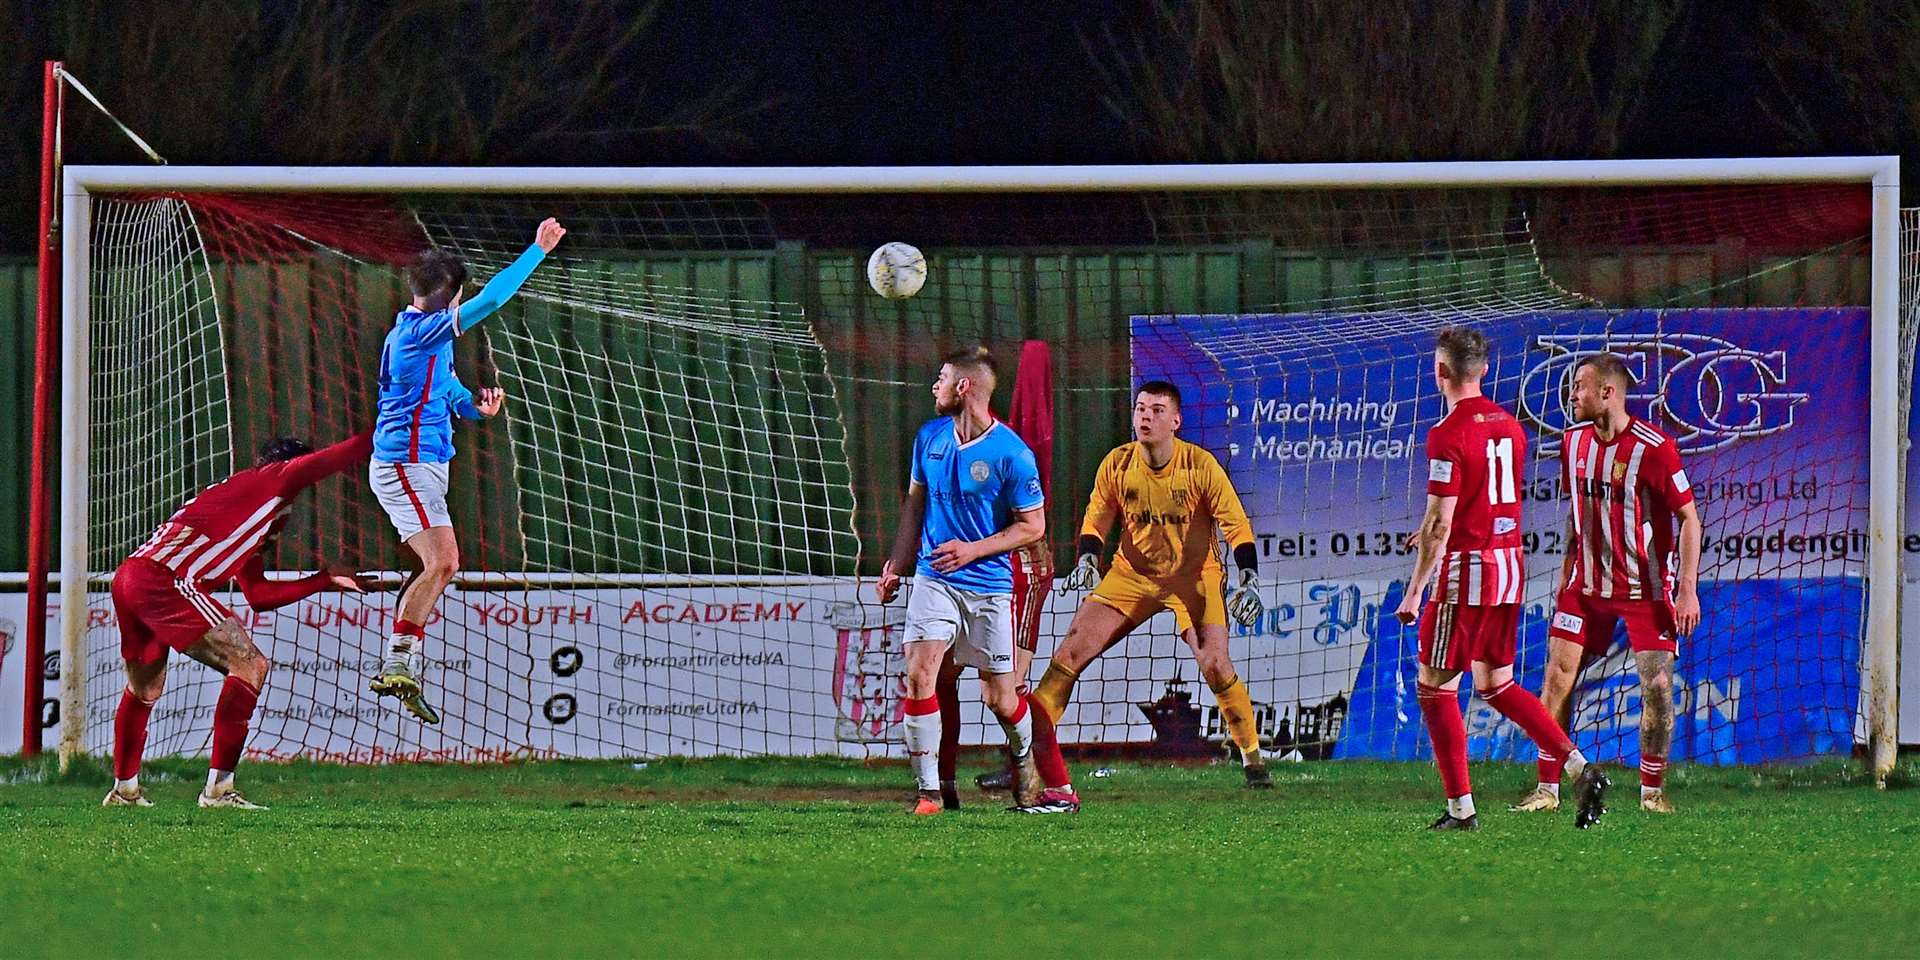 Gary Pullen's header brings Wick Academy level in the first half at North Lodge Park. Picture: Mel Roger